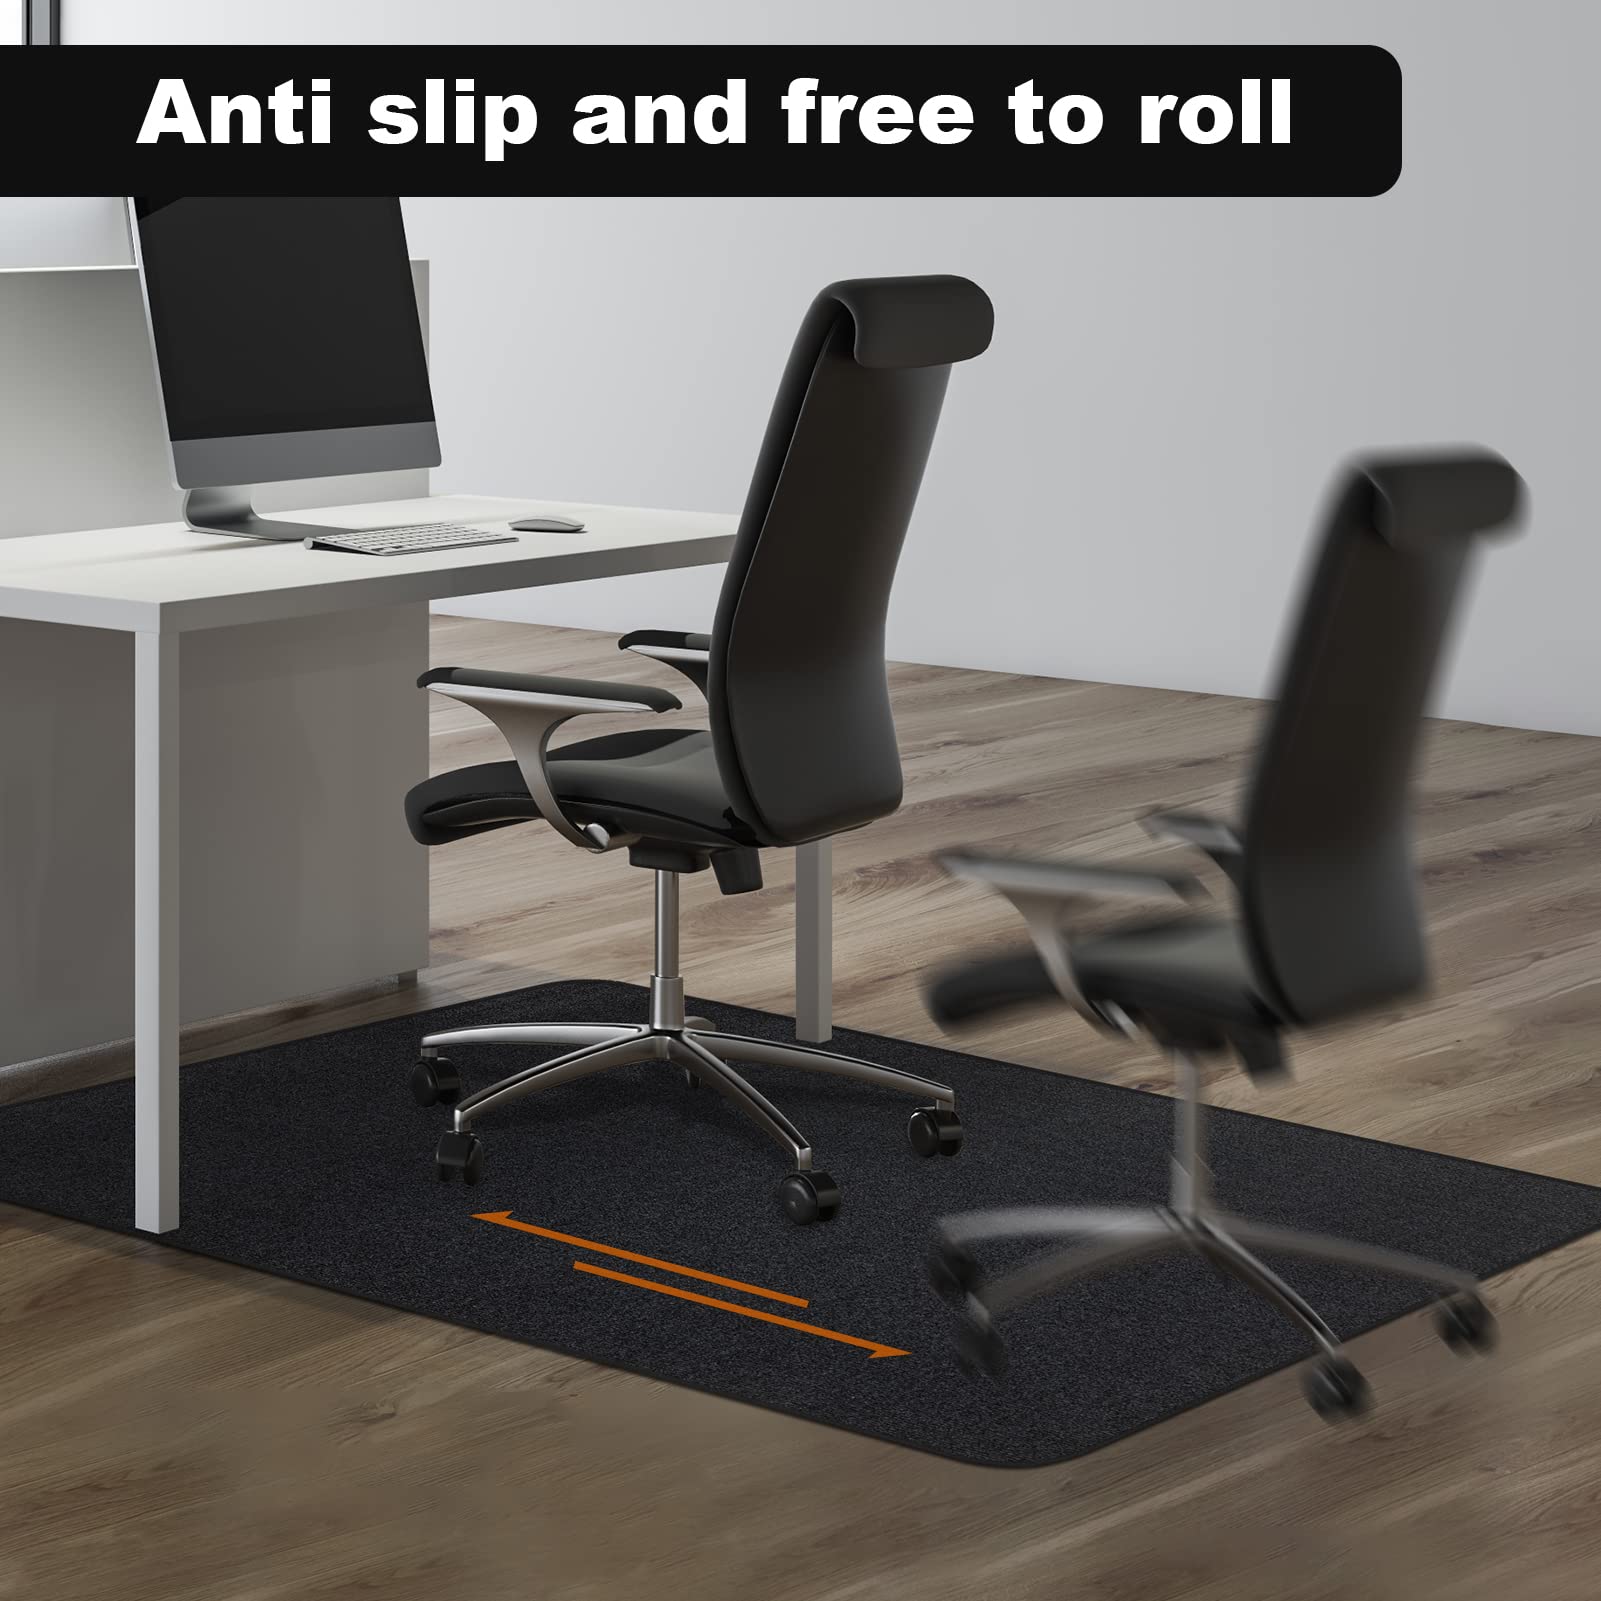 CELION Edging Office Chair Mat for Hardwood & Tile Floor, 55"x35" Computer Gaming Rolling Chair Mat, Under Desk Low-Pile Rug, Large Anti-Slip Floor Protector for Home Office (Black, 55" x 35")